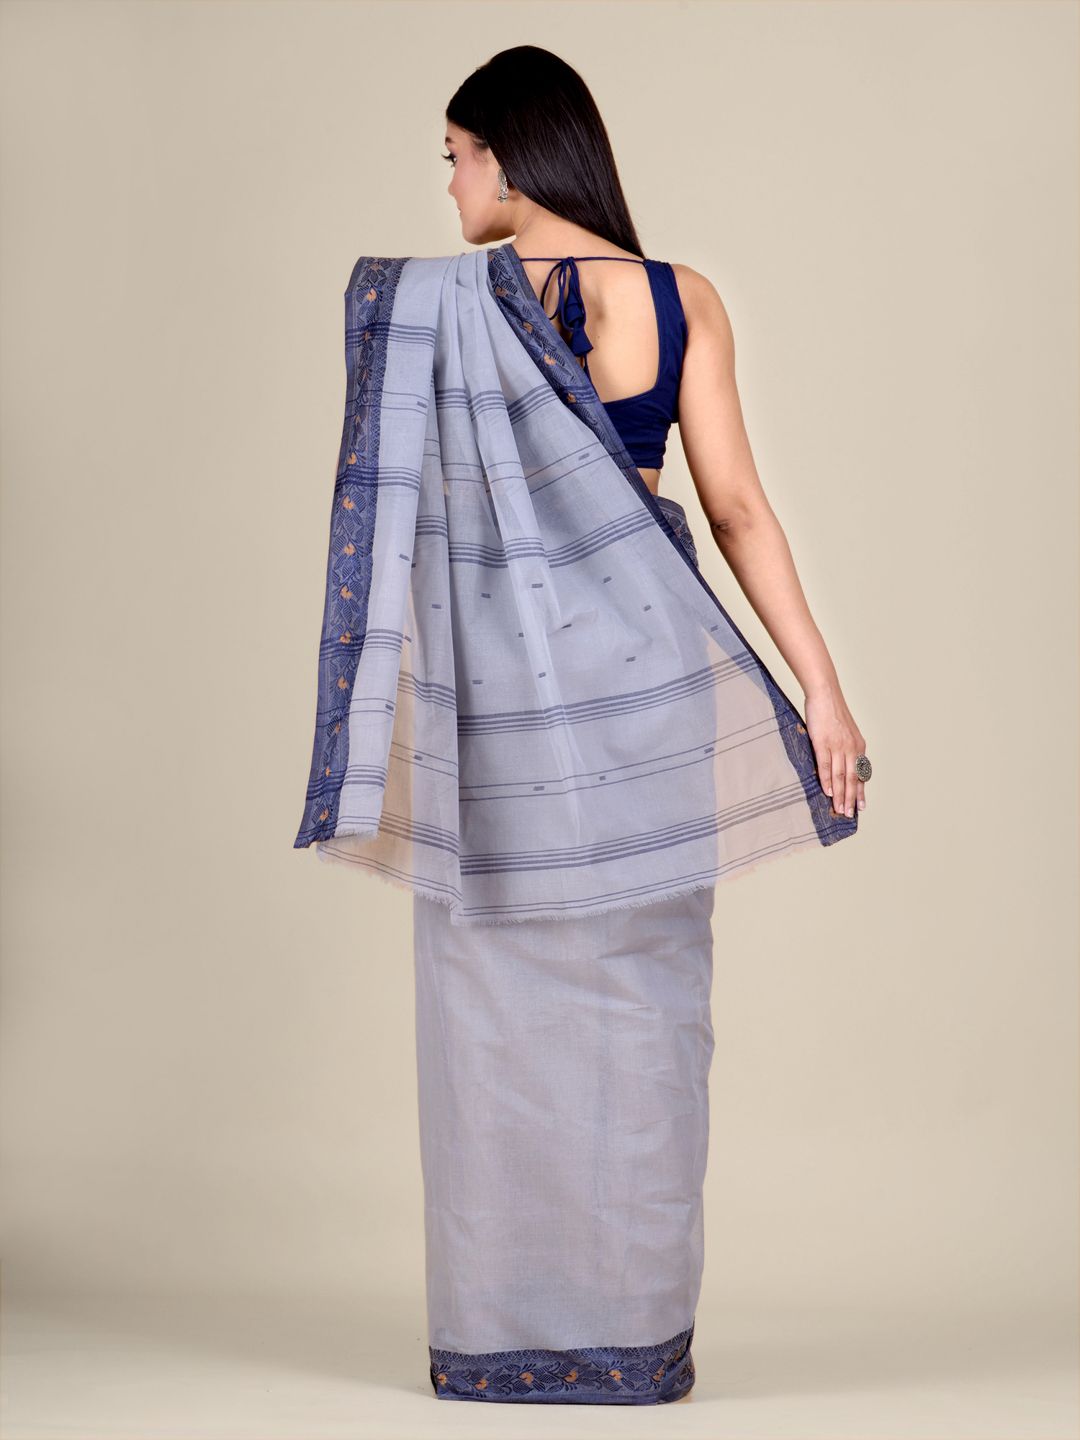 Women's Grey Cotton Hand Woven Tant Saree With Blue Border Without Blouse-Sajasajo